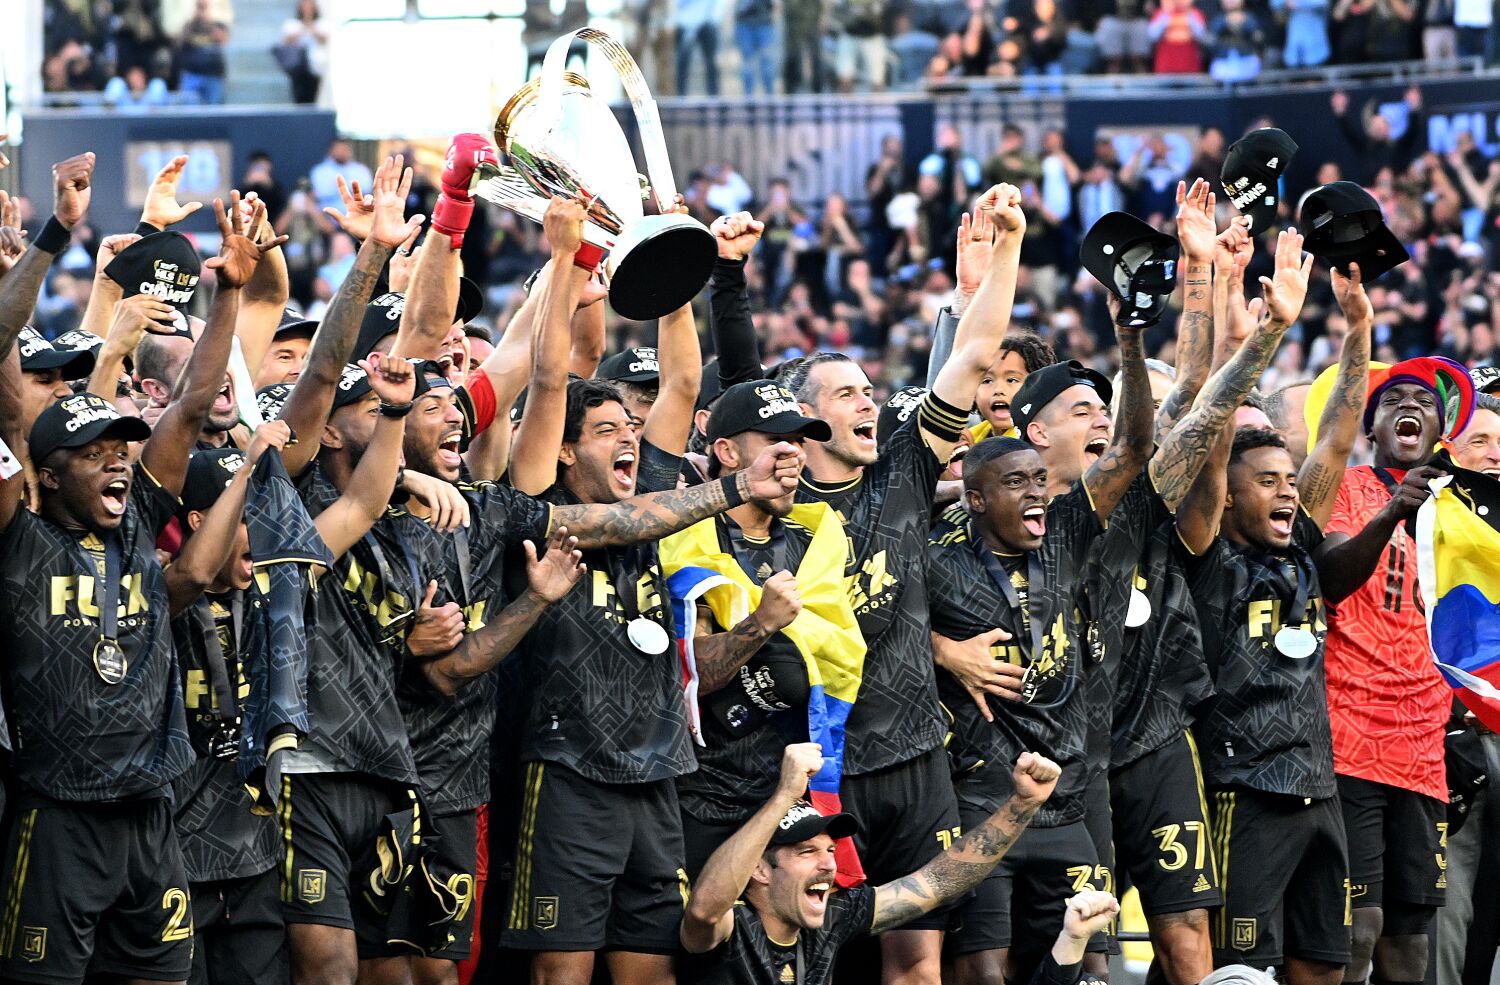 LAFC defeats Philadelphia on penalty kicks to win MLS Cup title in thriller 